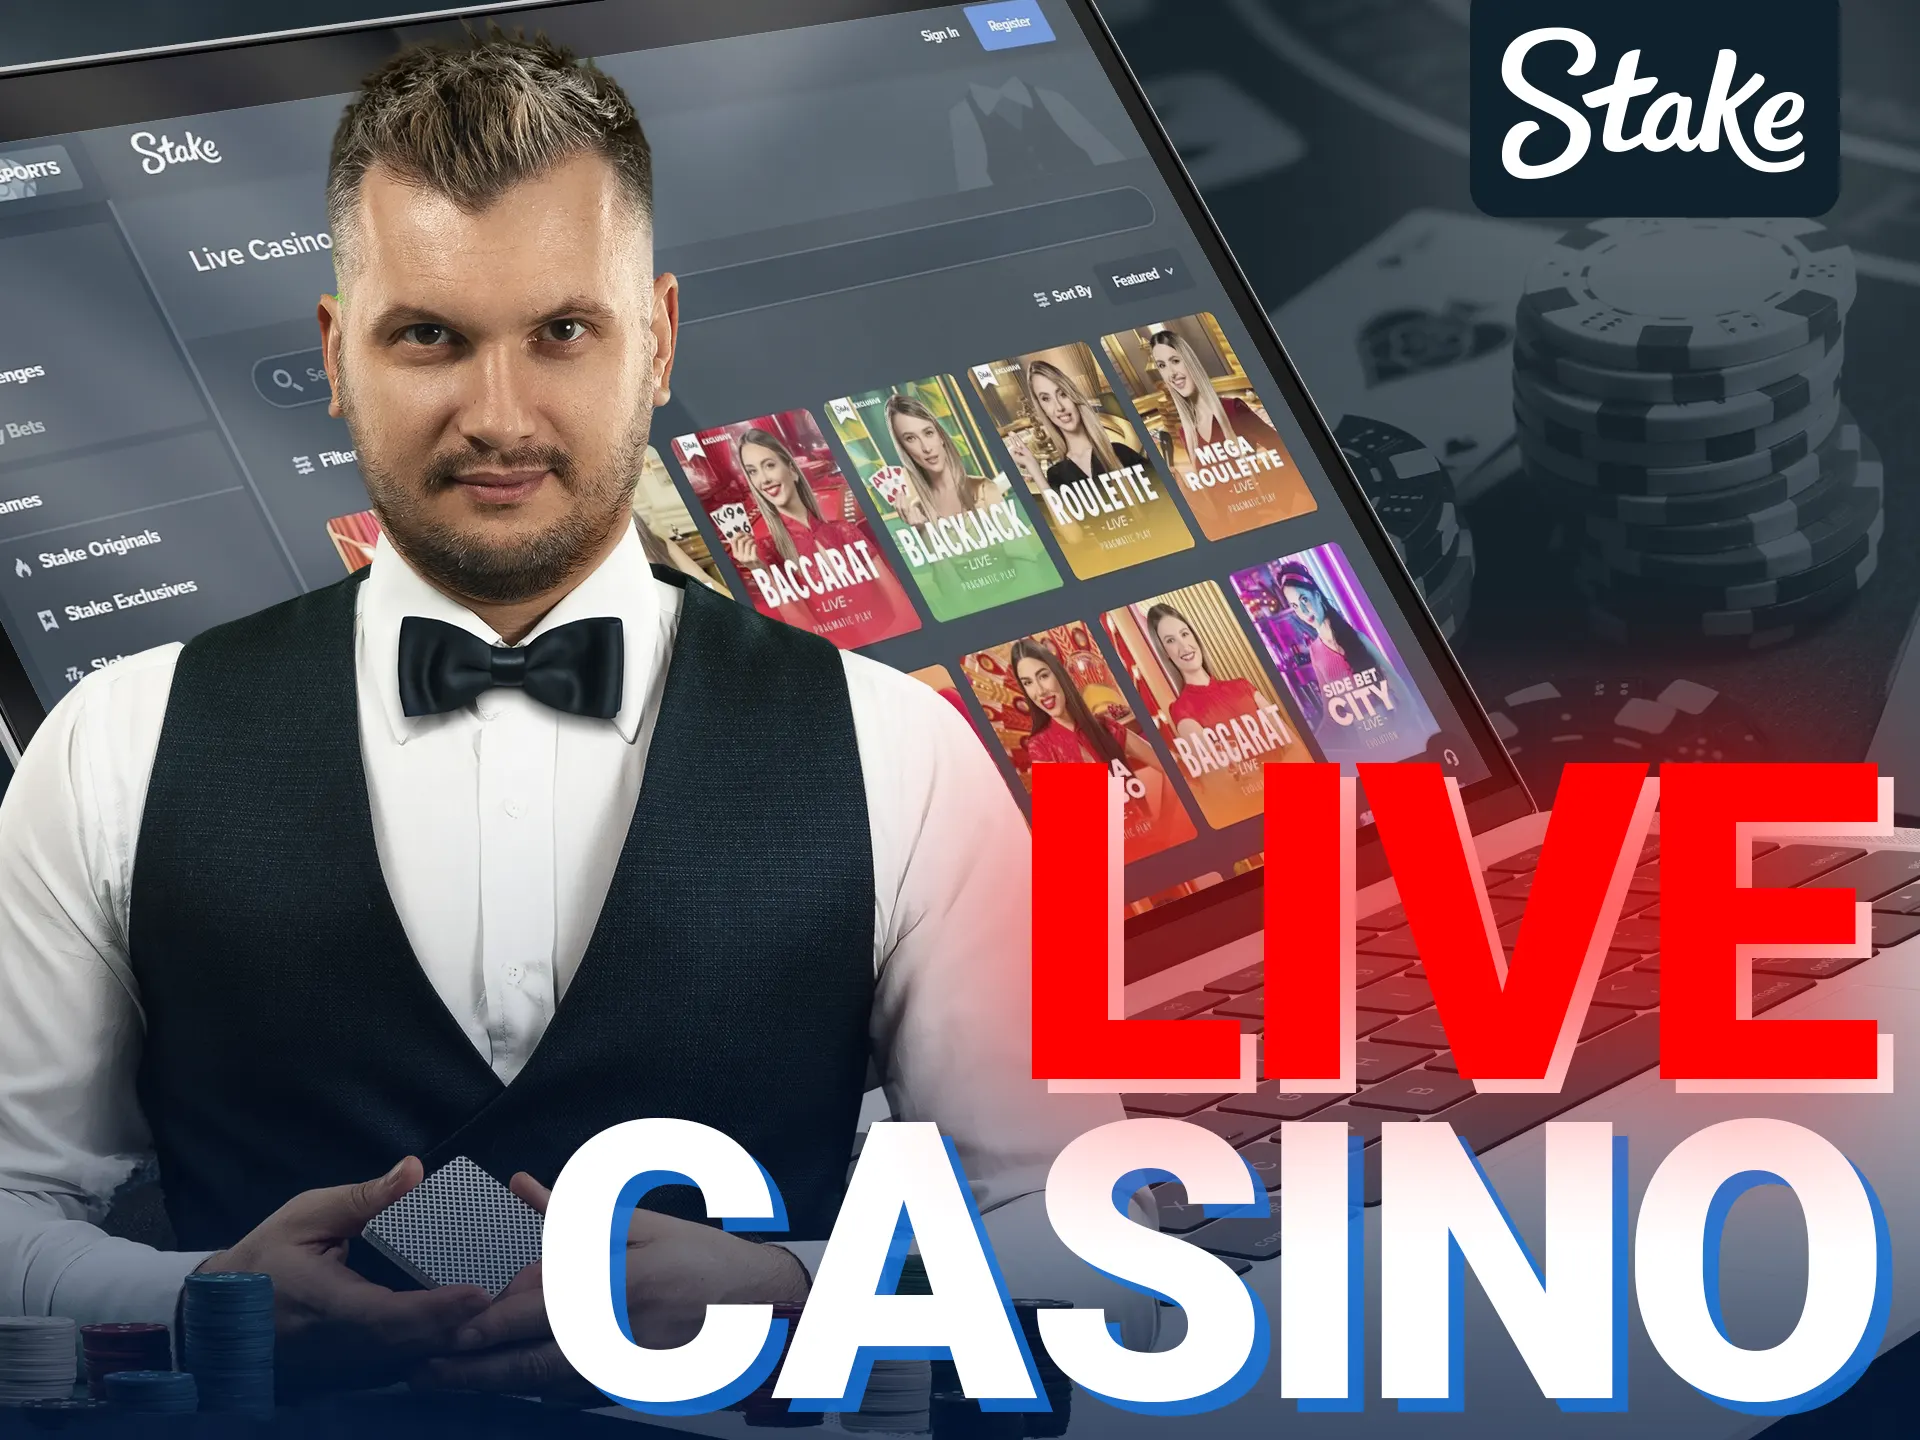 Stake offers engaging live casino games with real dealers.